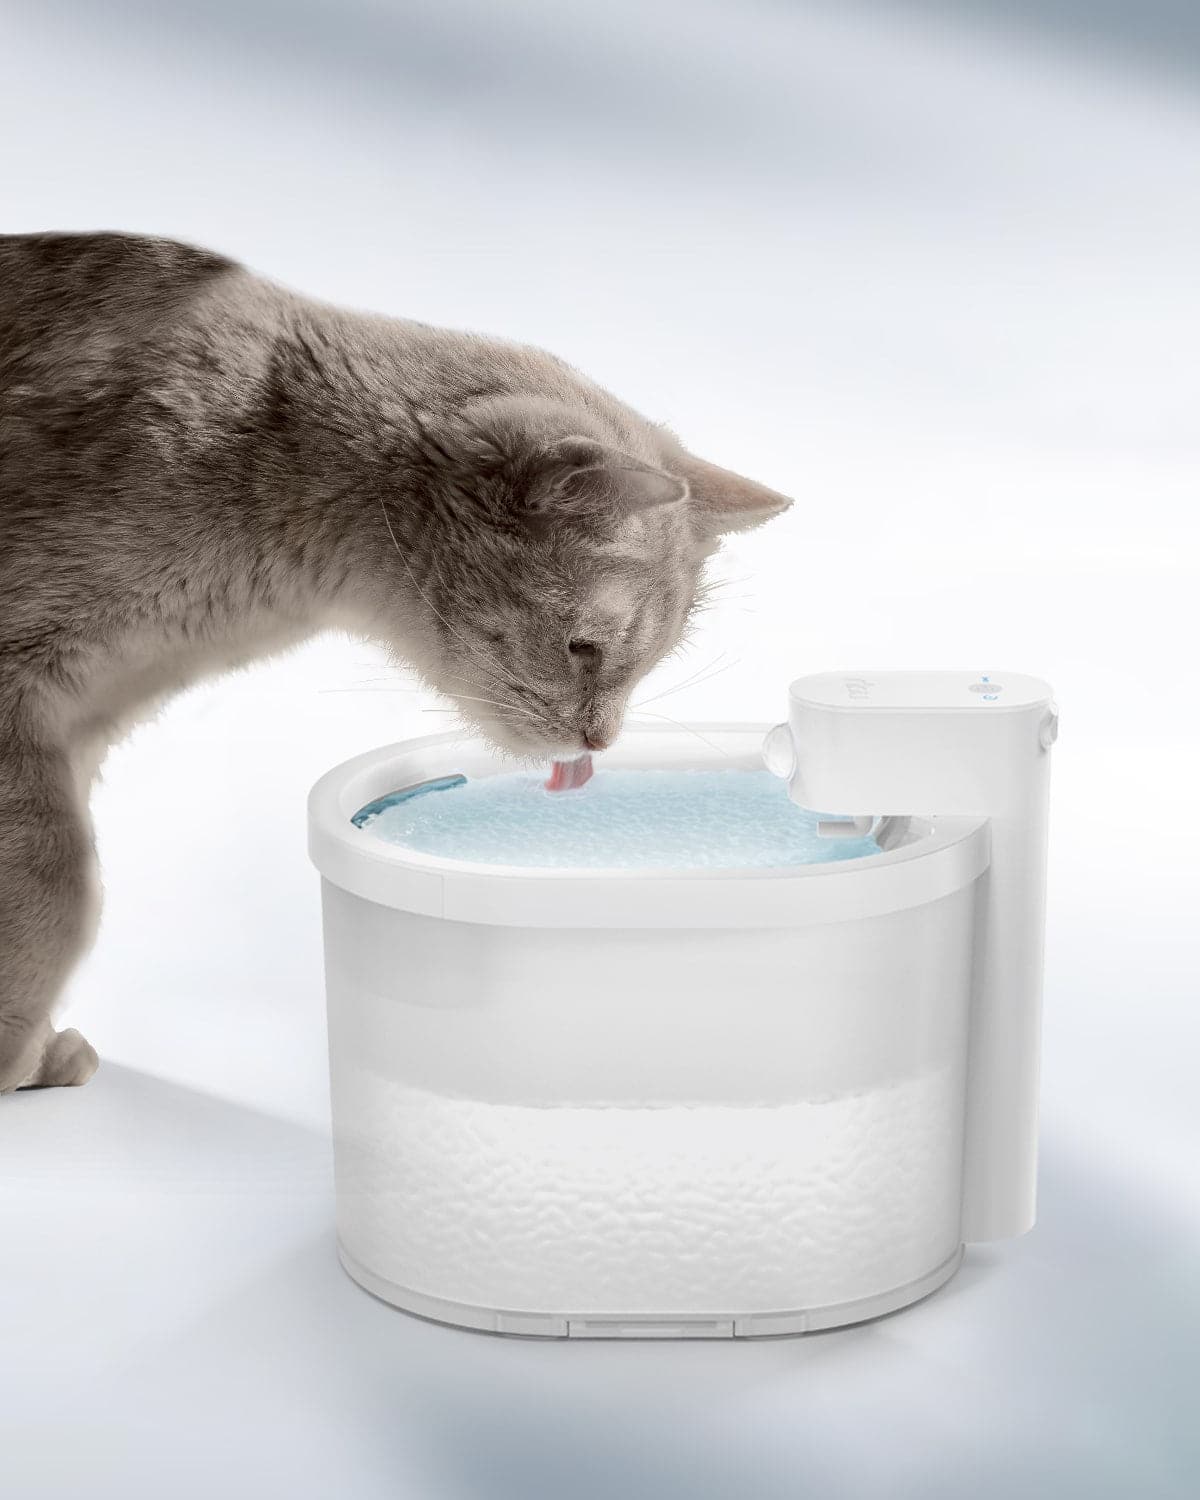 Dog Water Fountain: 5 Top-Rated Options To Keep Your Dog's Water